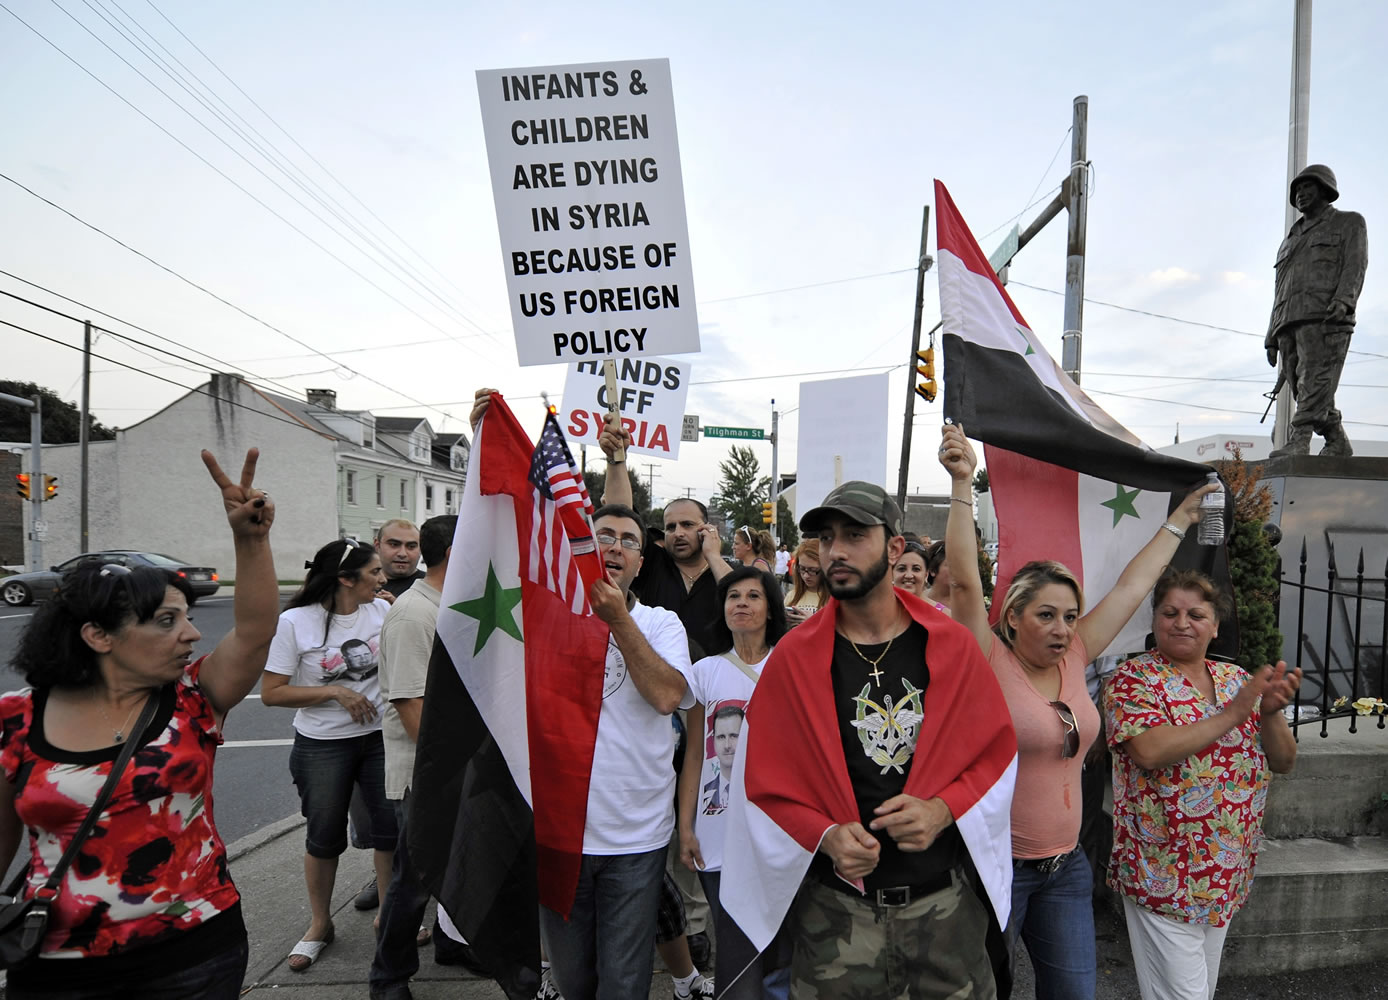 Members of the local Syrian community rally against the United States' involvement in Syria on Tuesday in Allentown, Pa.